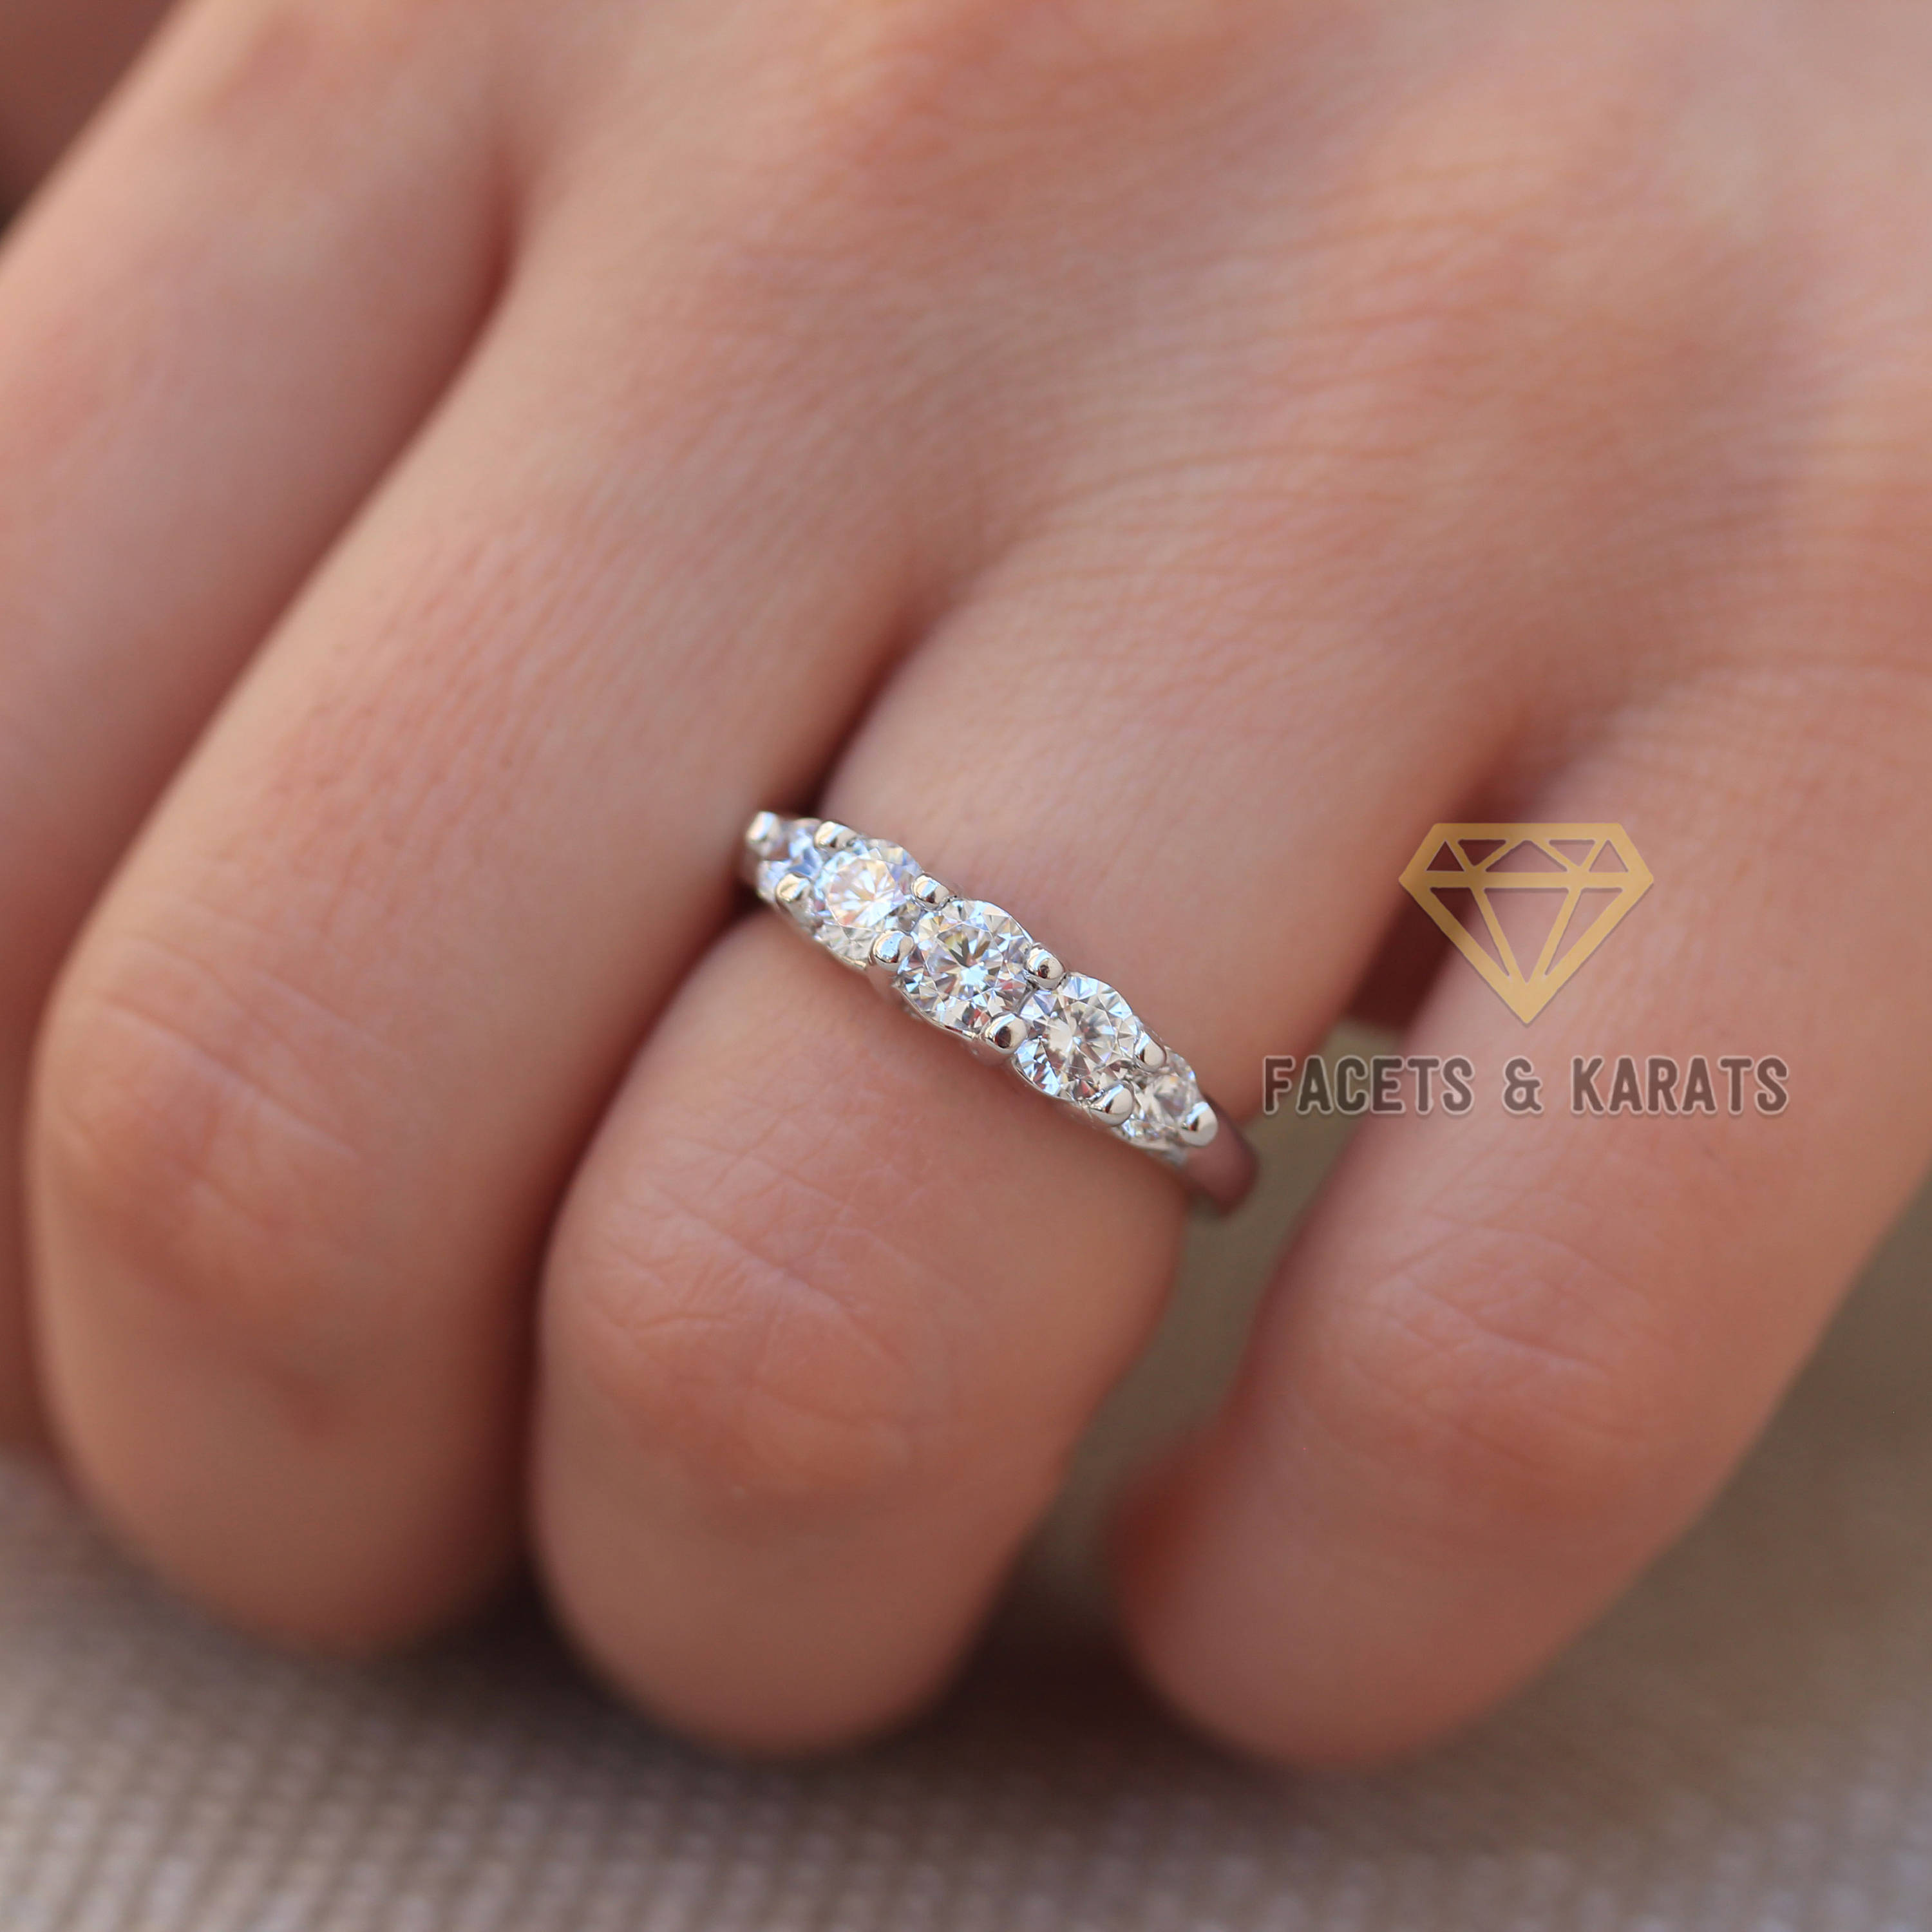 Details about   Classic Five Stone Engagement Wedding Ring 2.20 Ct Diamond 14K White Gold Finish 